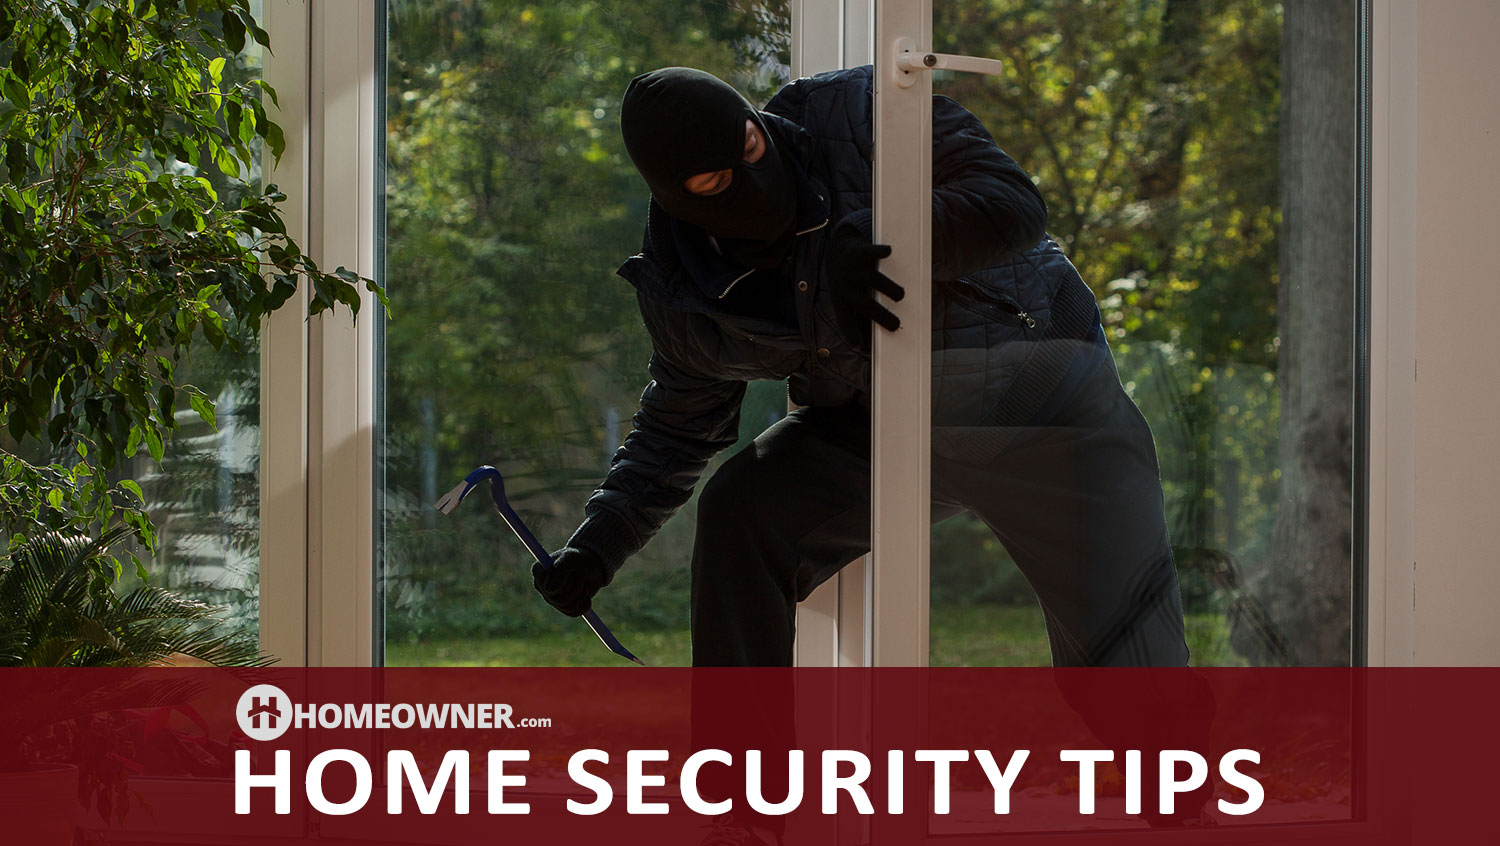 How To Foil a Burglar: 14 Security Tips for Homeowners